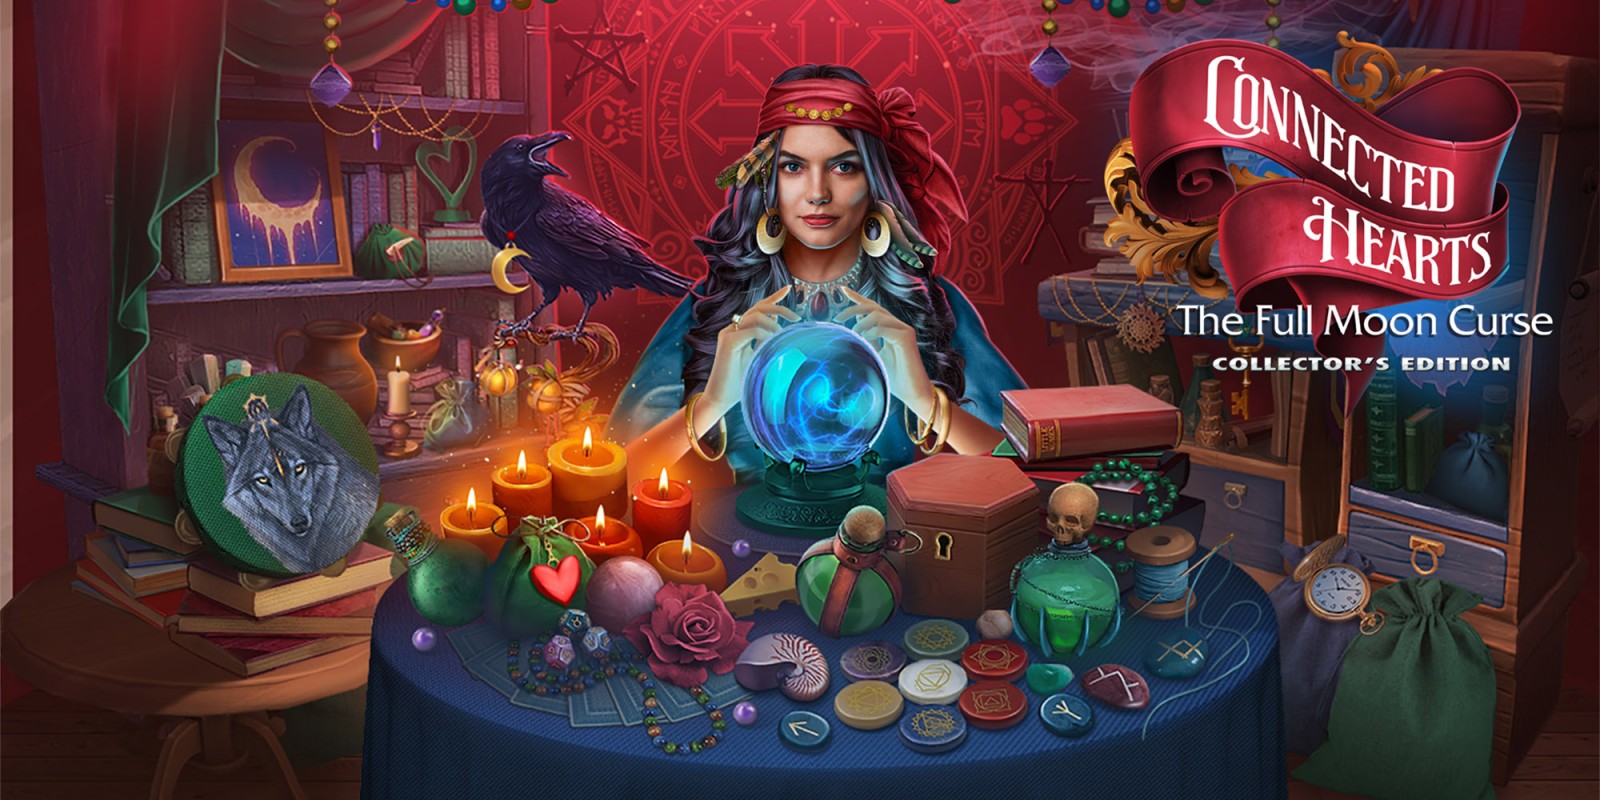 Connected Hearts: Full Moon Curse Collector’s Edition